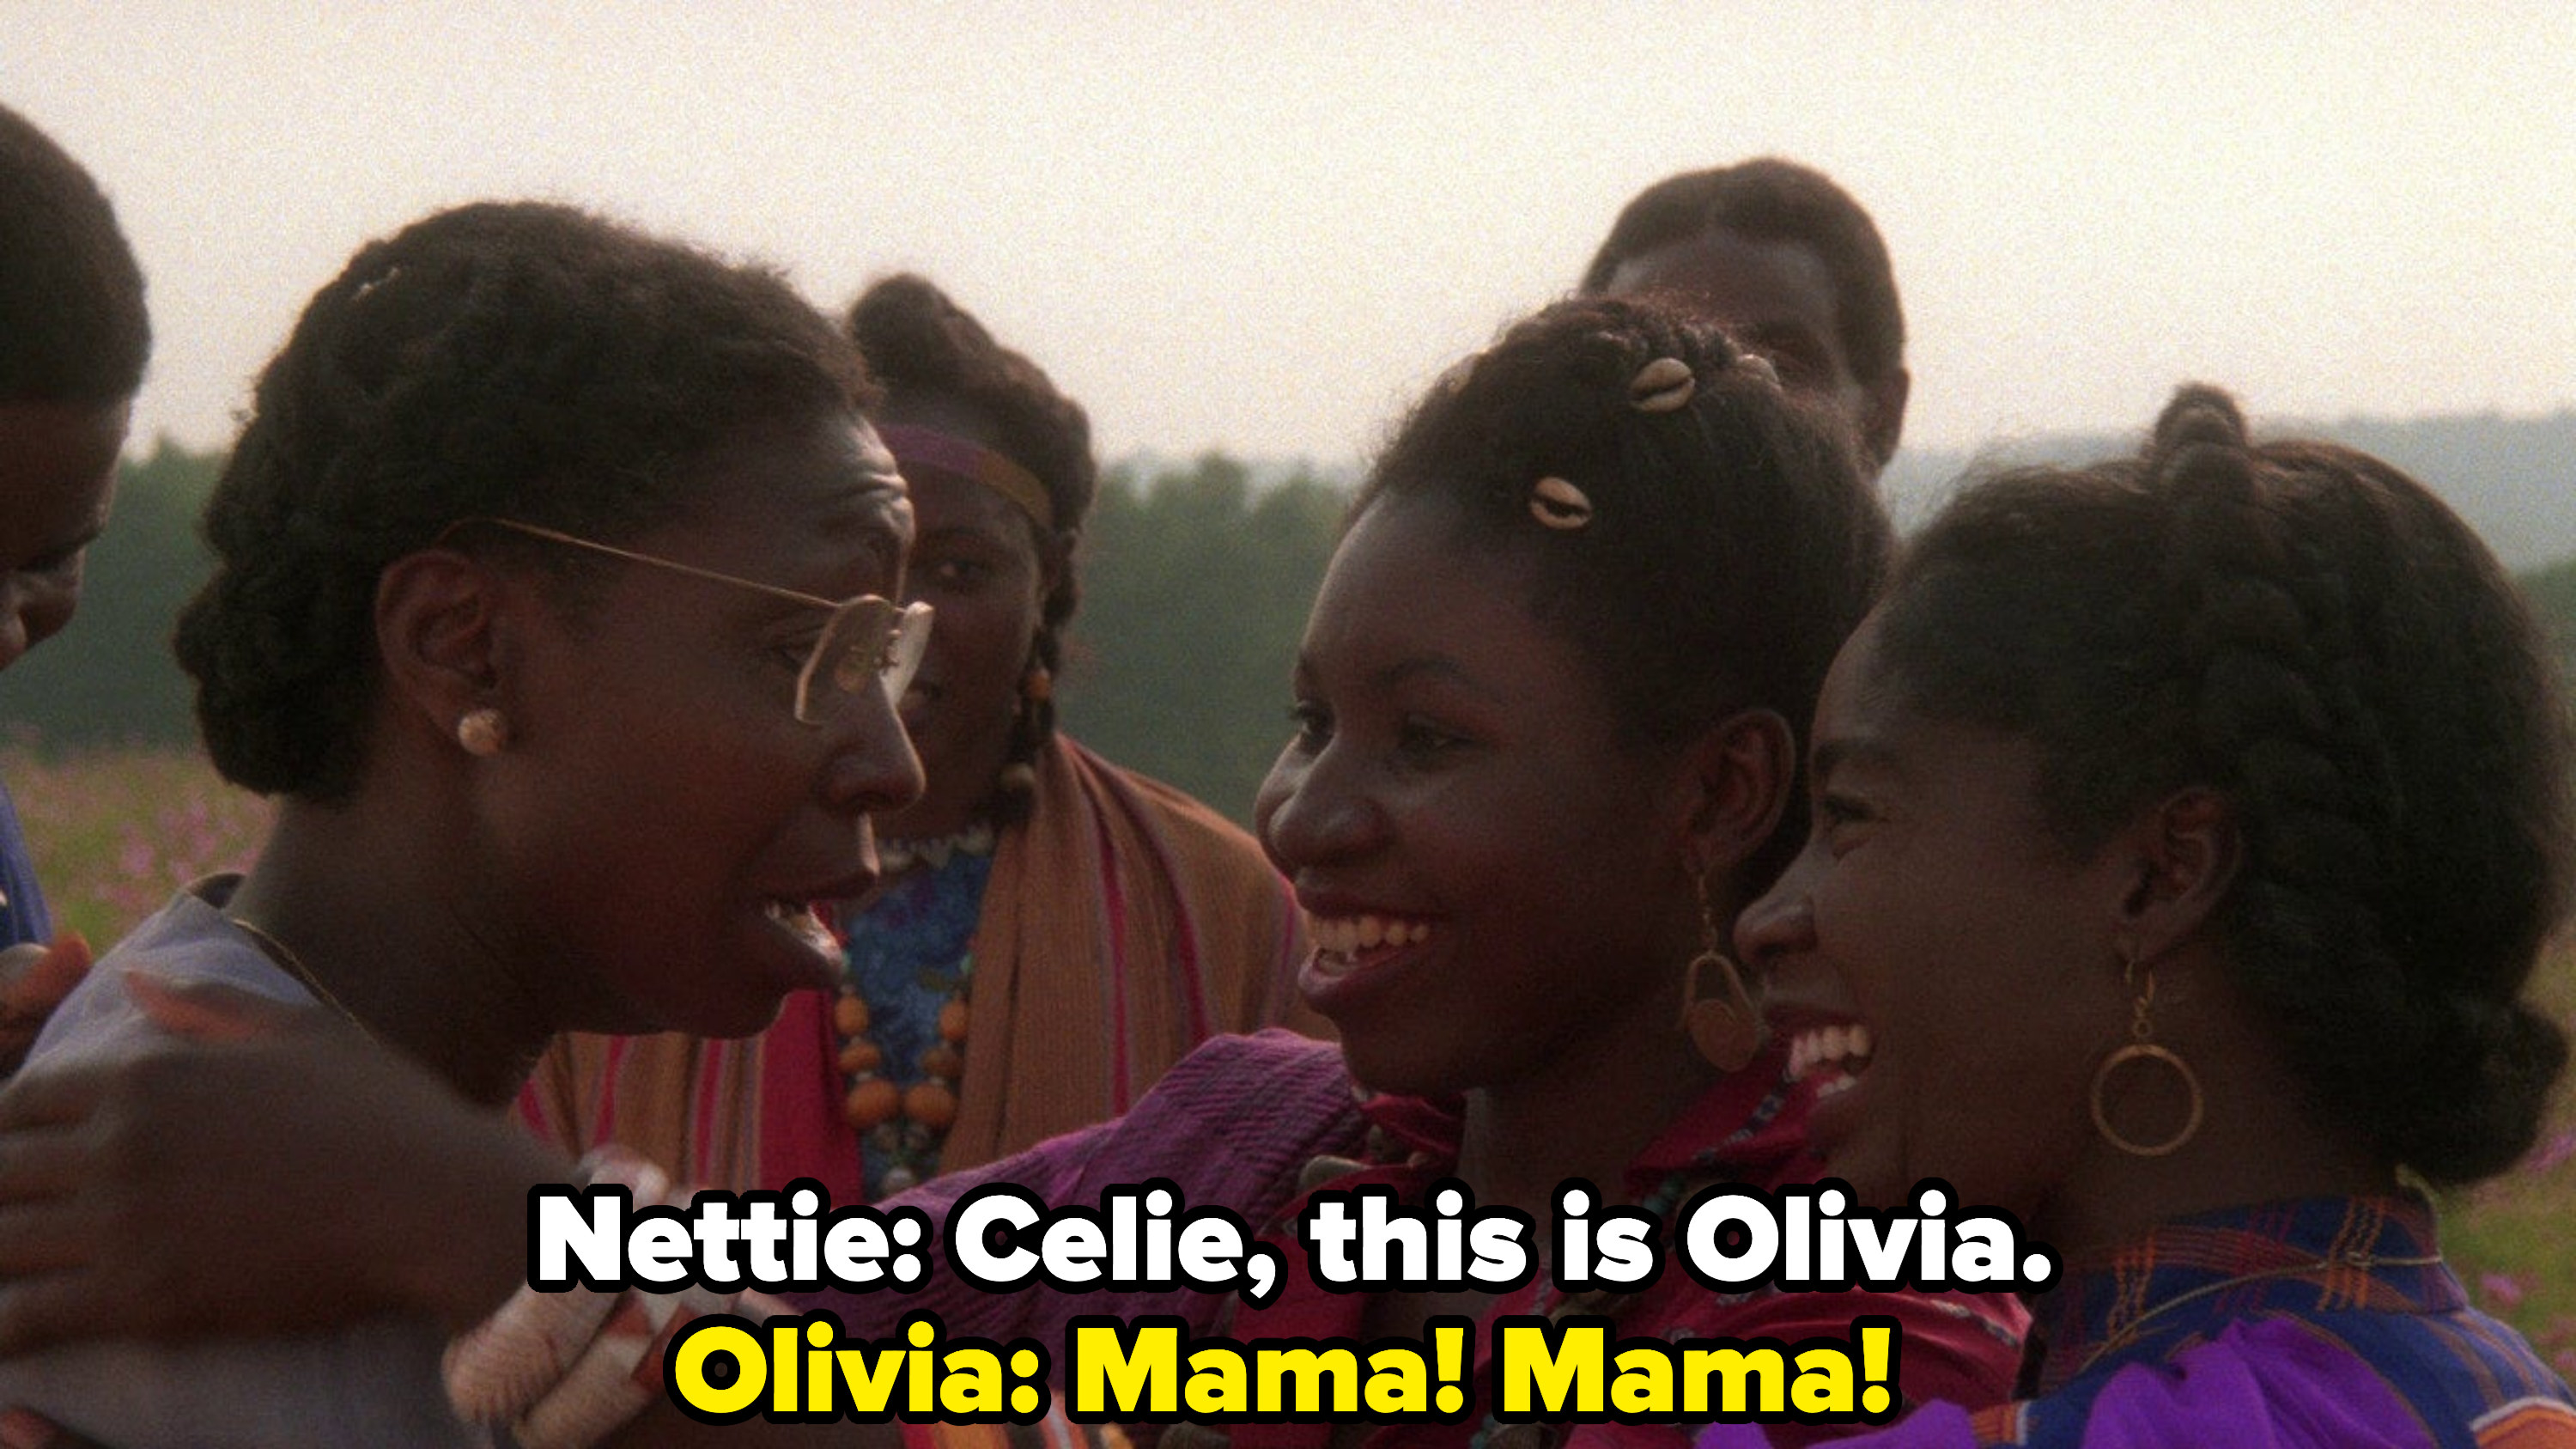 Celie is in complete shock to see her children and her sister, Nettie, after many years of not seeing each other